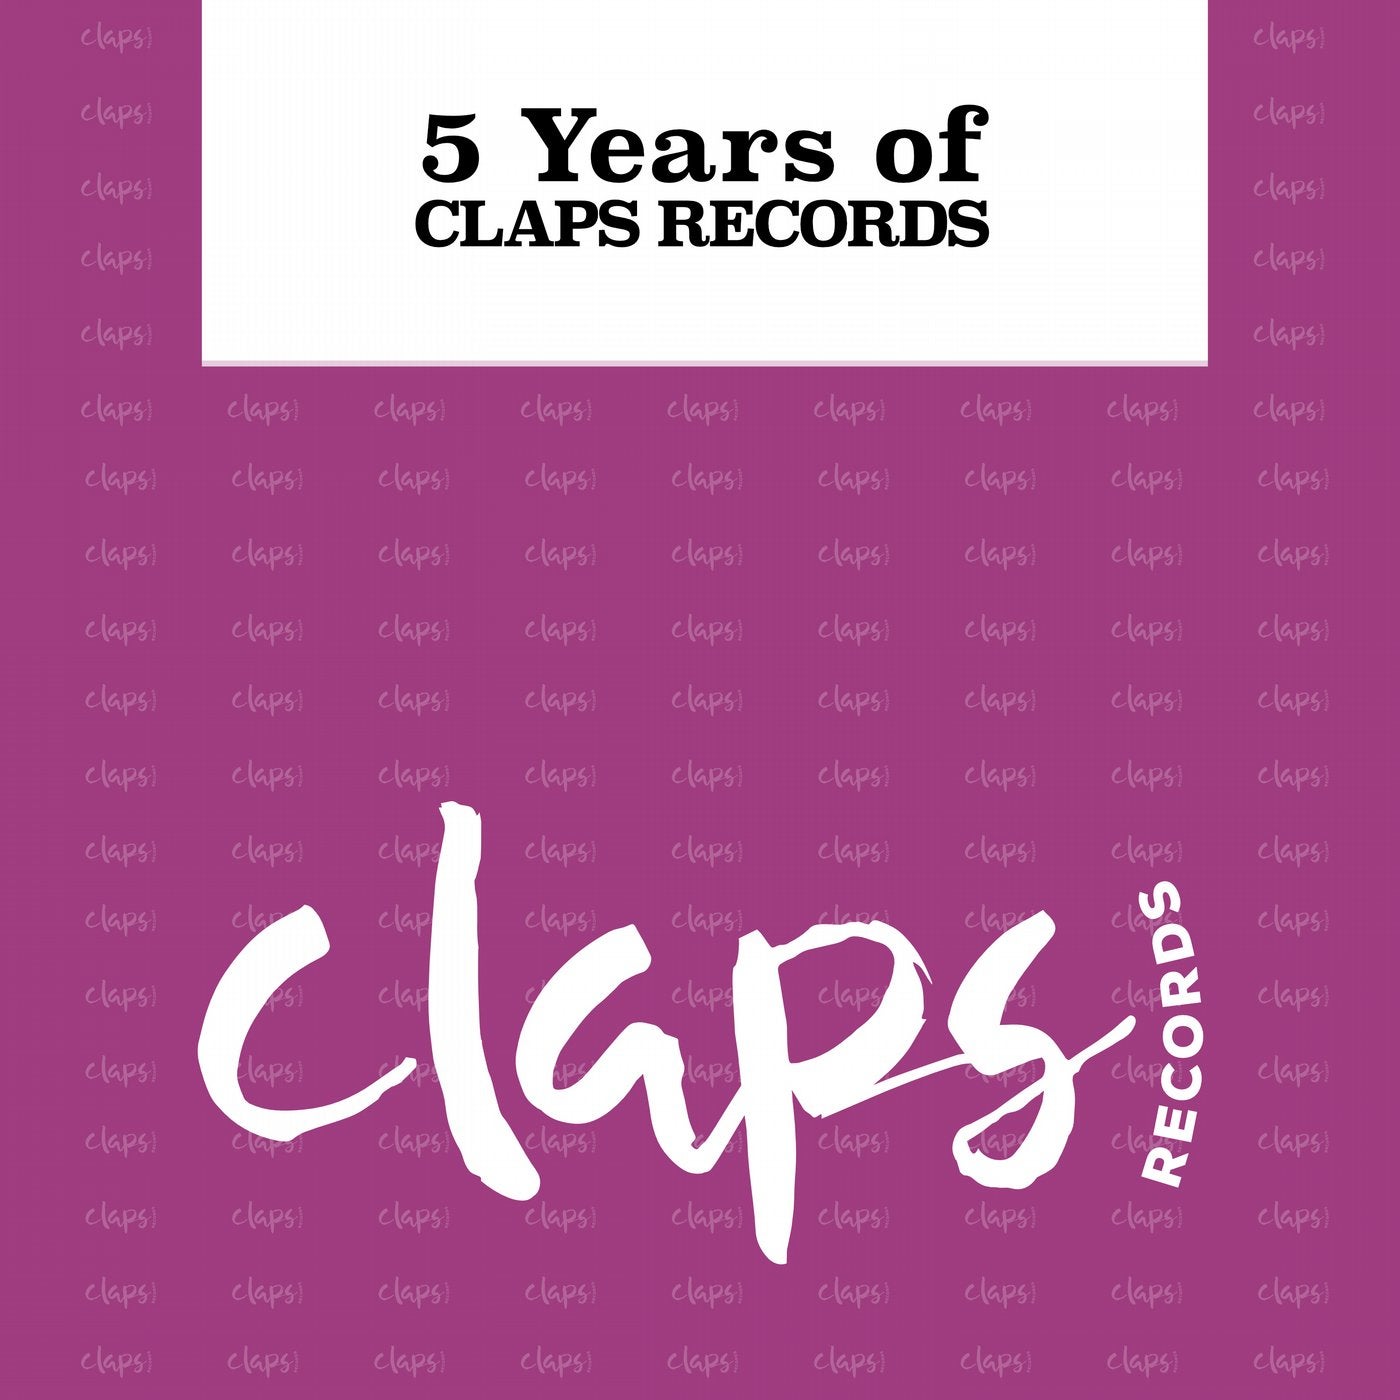 5 Years of Claps Records